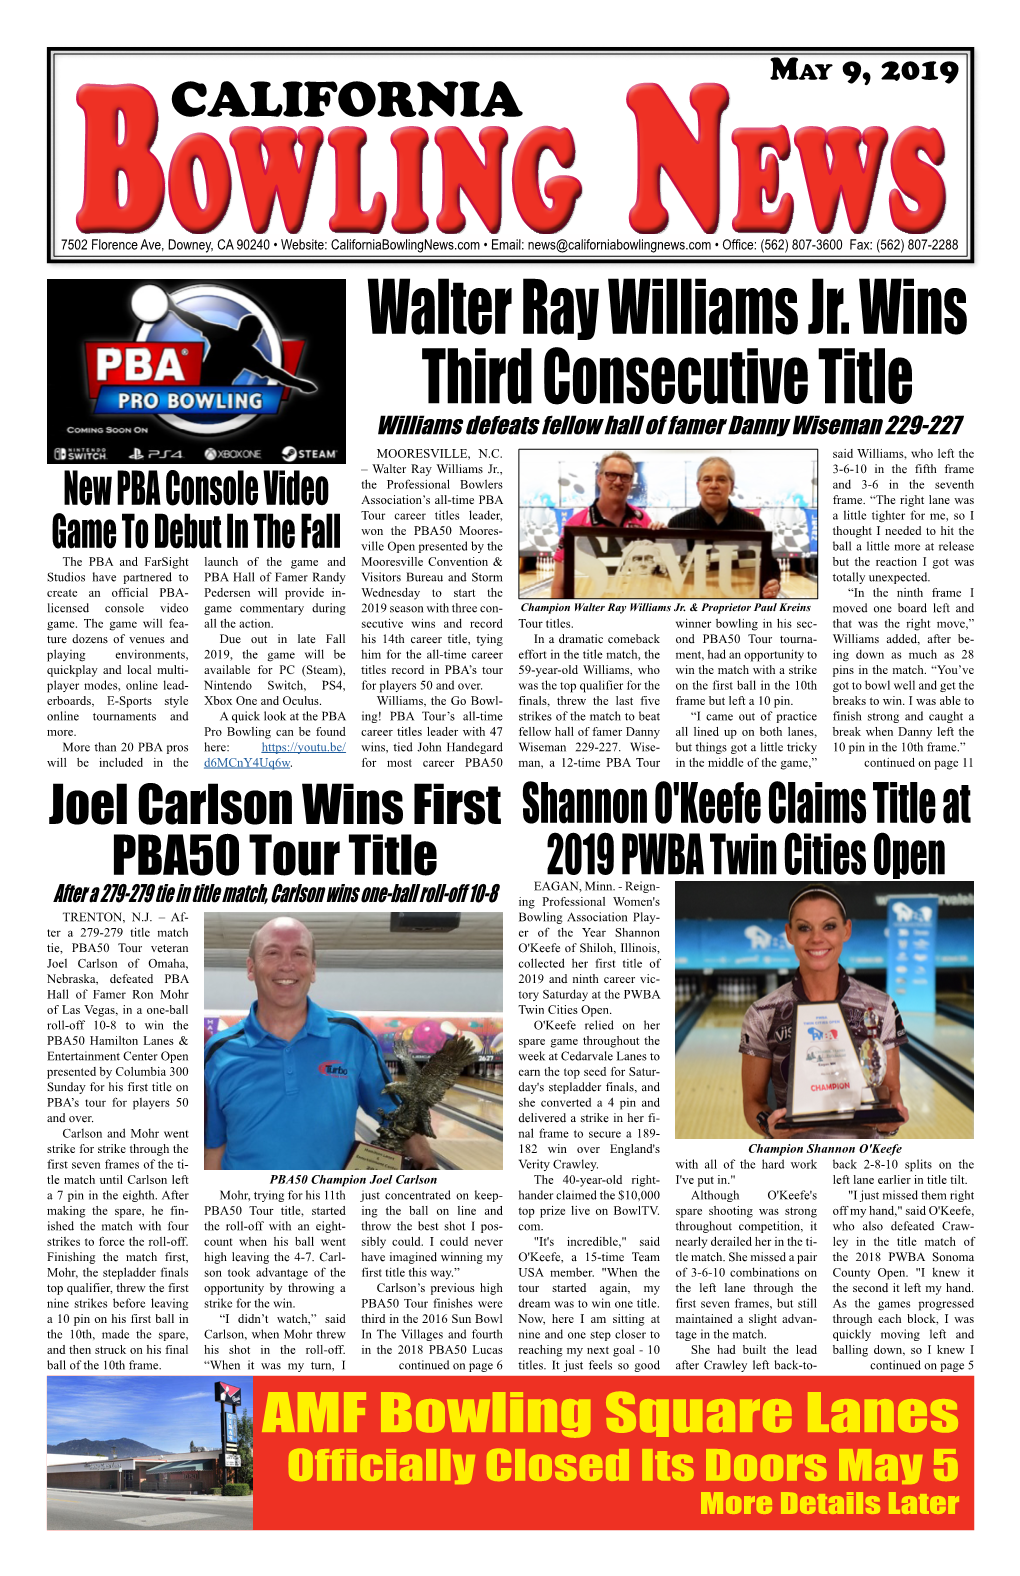 Walter Ray Williams Jr. Wins Third Consecutive Title Williams Defeats Fellow Hall of Famer Danny Wiseman 229-227 MOORESVILLE, N.C